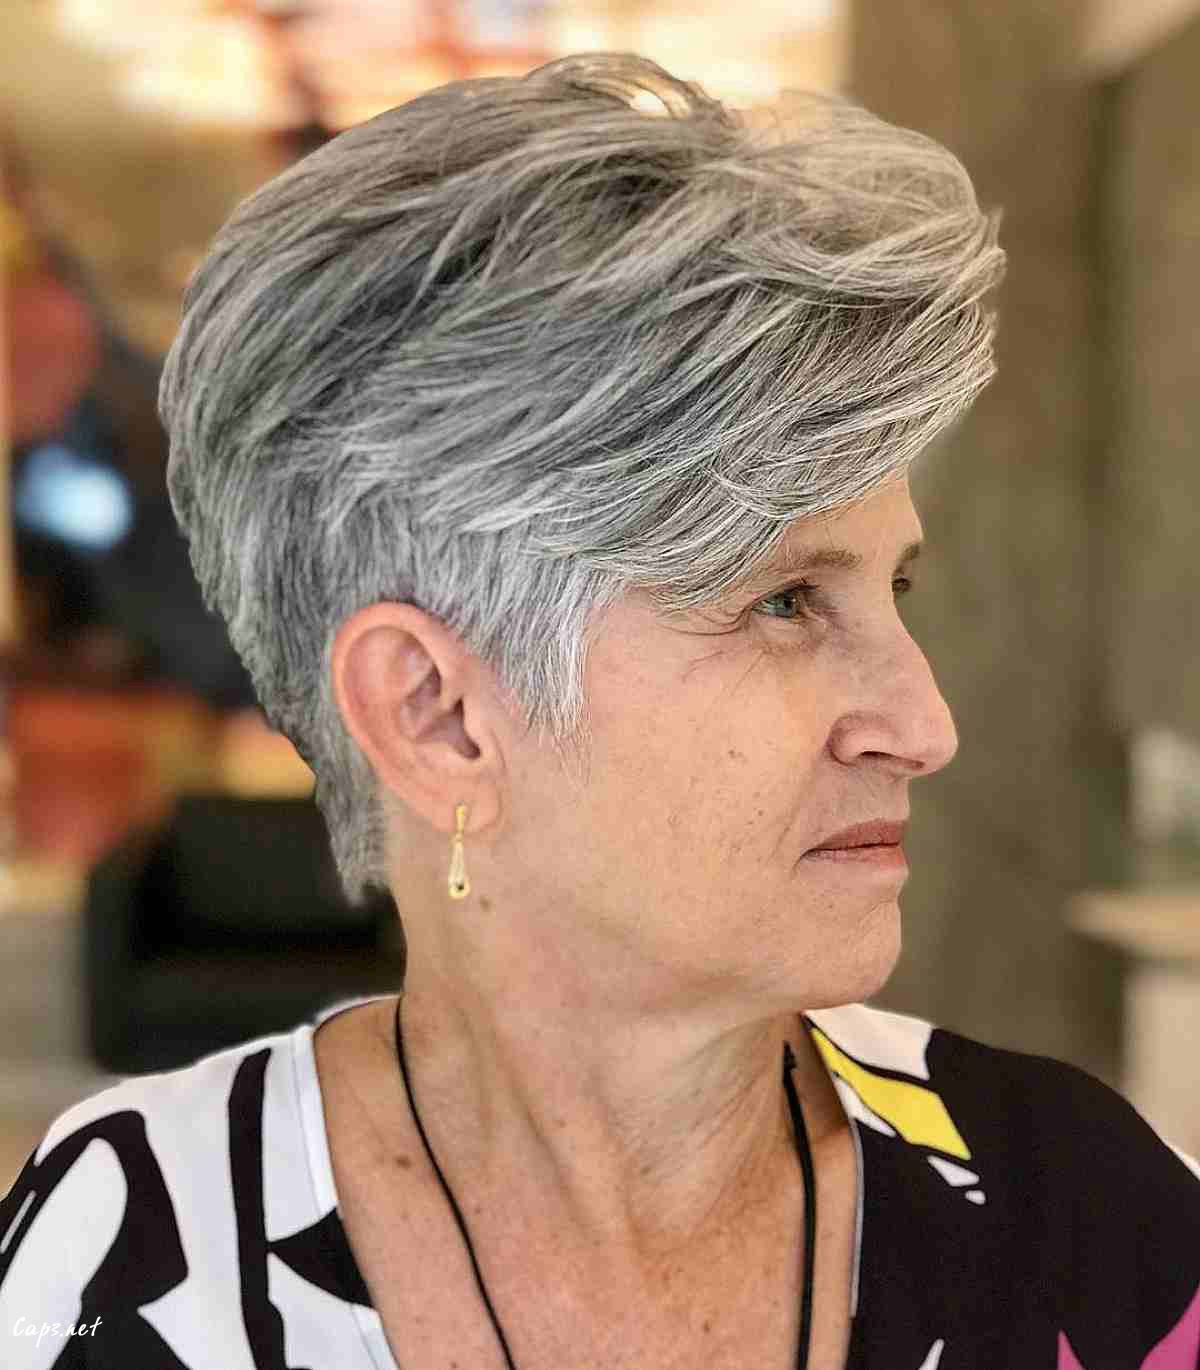 long pixie cut hairstyle for women over 70